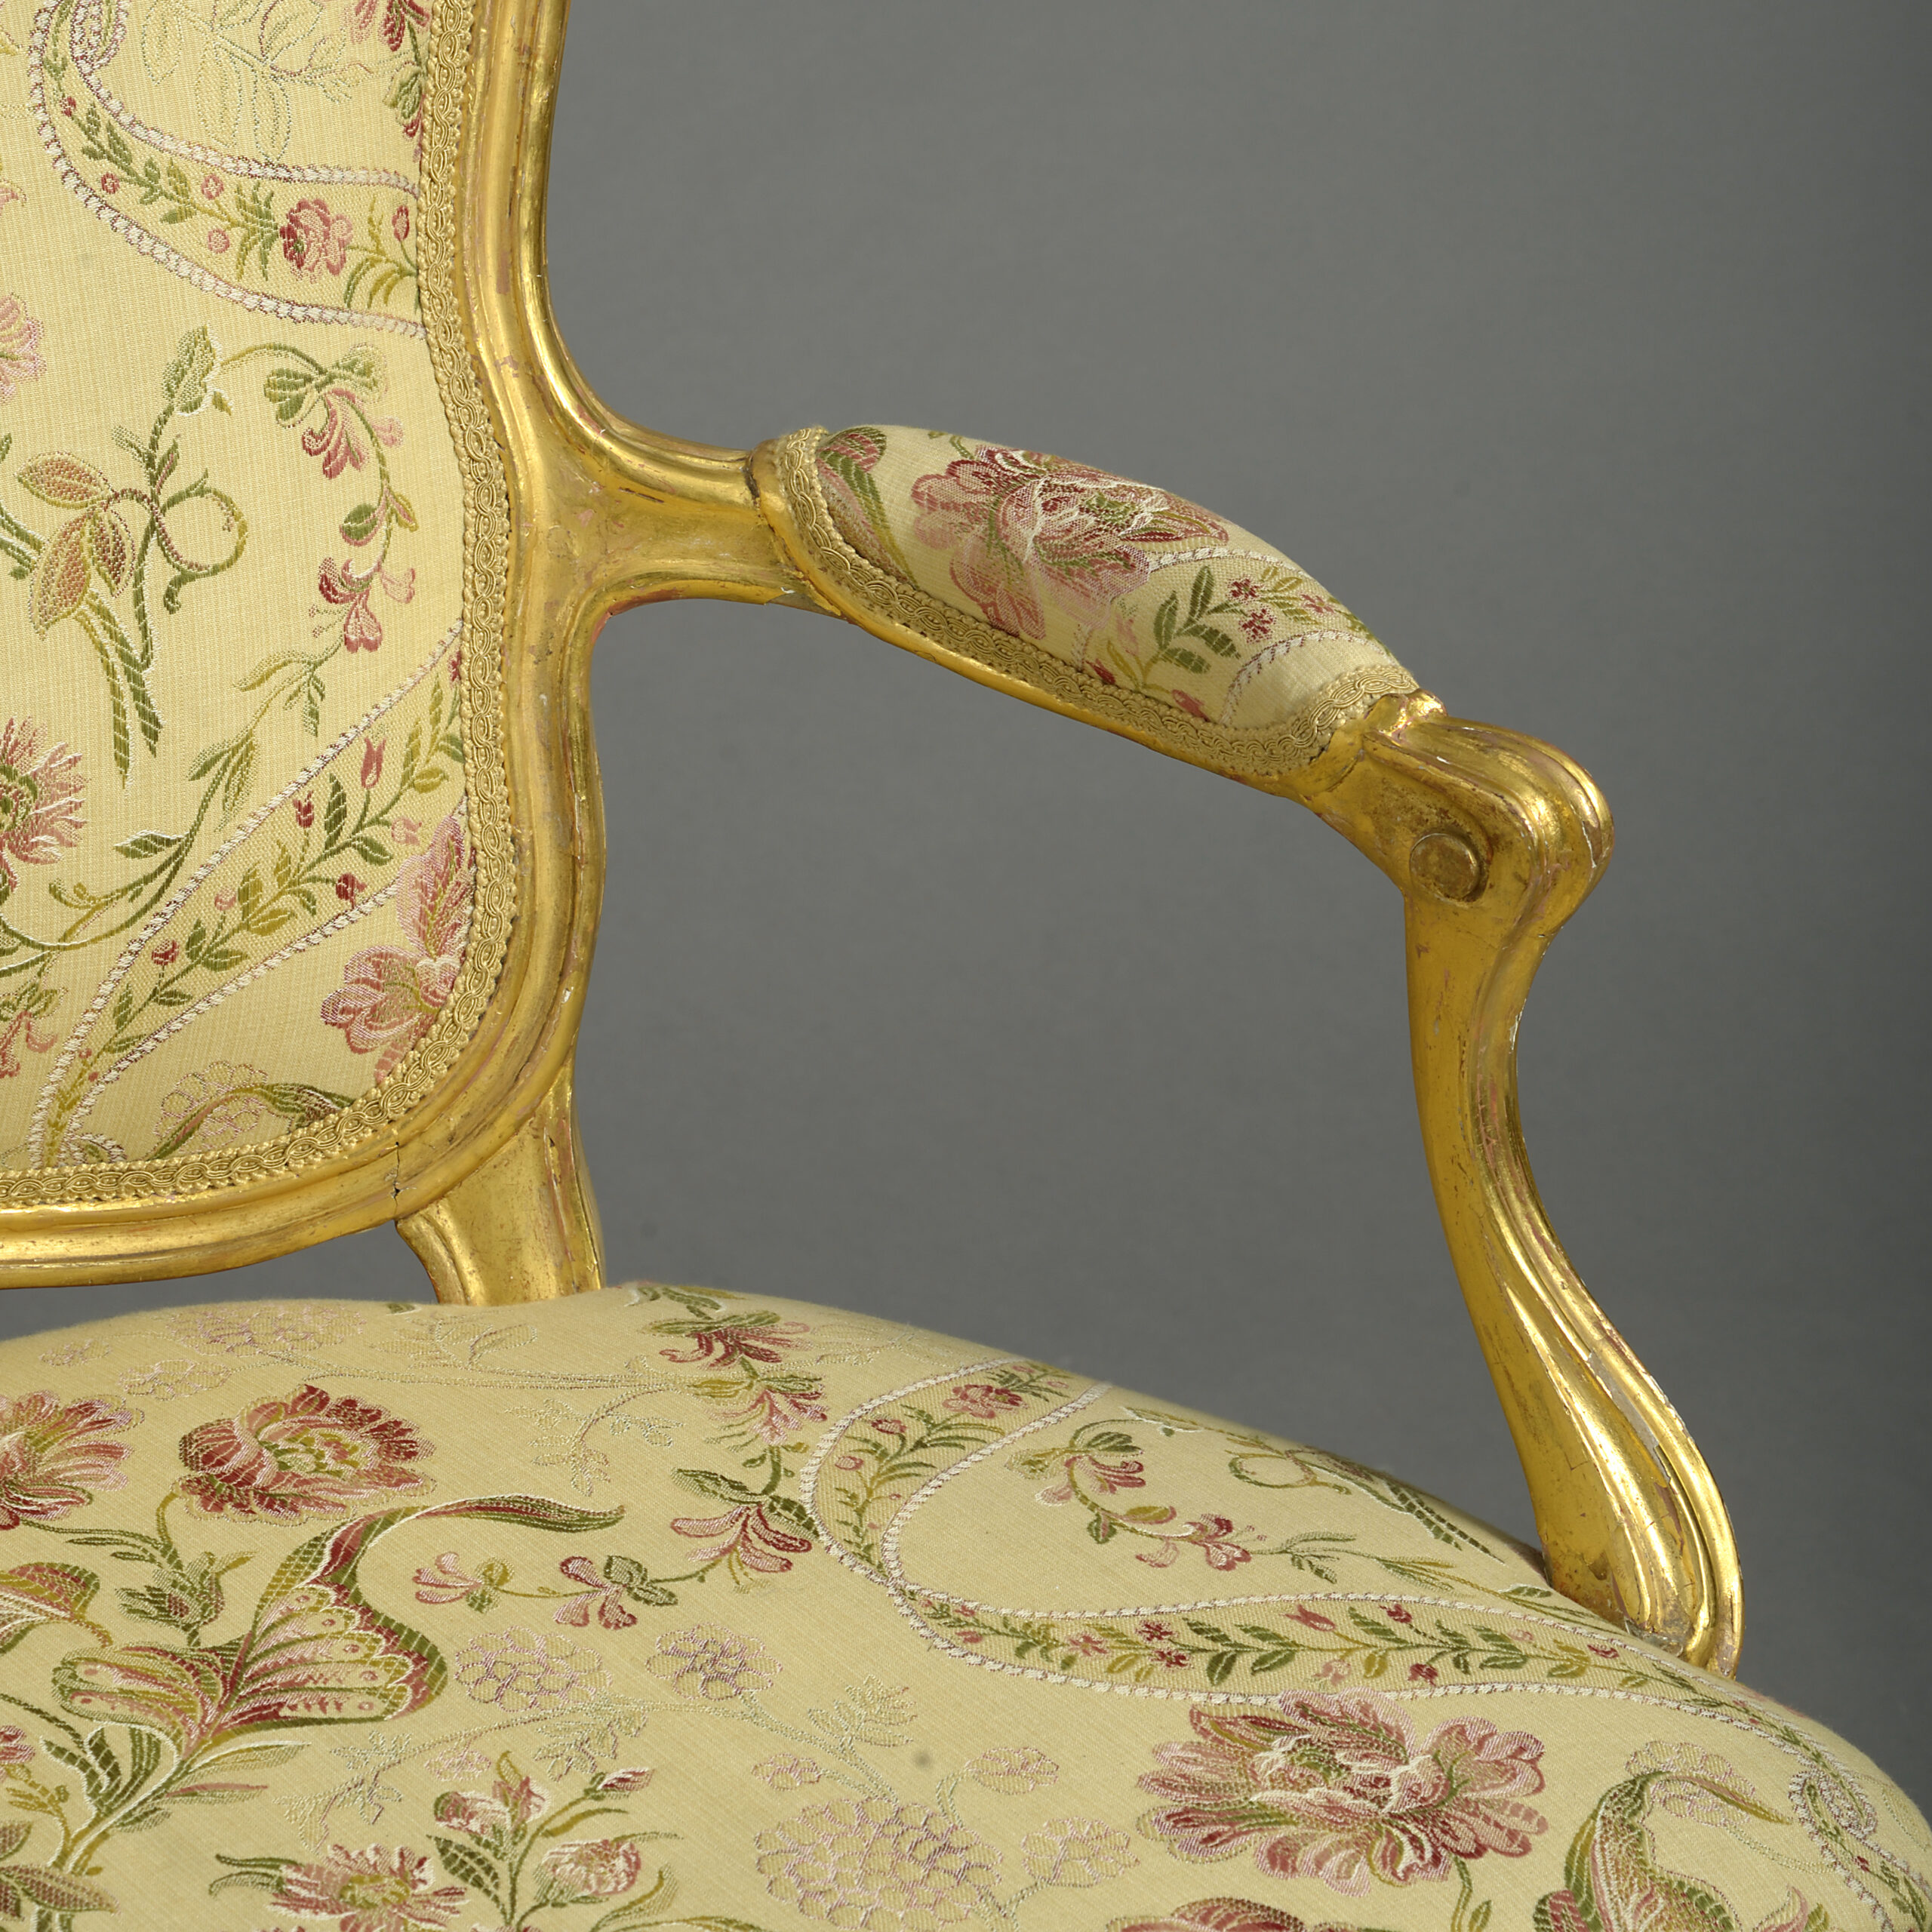 A Close Pair of Louis XV Giltwood Rococo Fauteuil Armchairs | Timothy  Langston Fine Art & Antiques